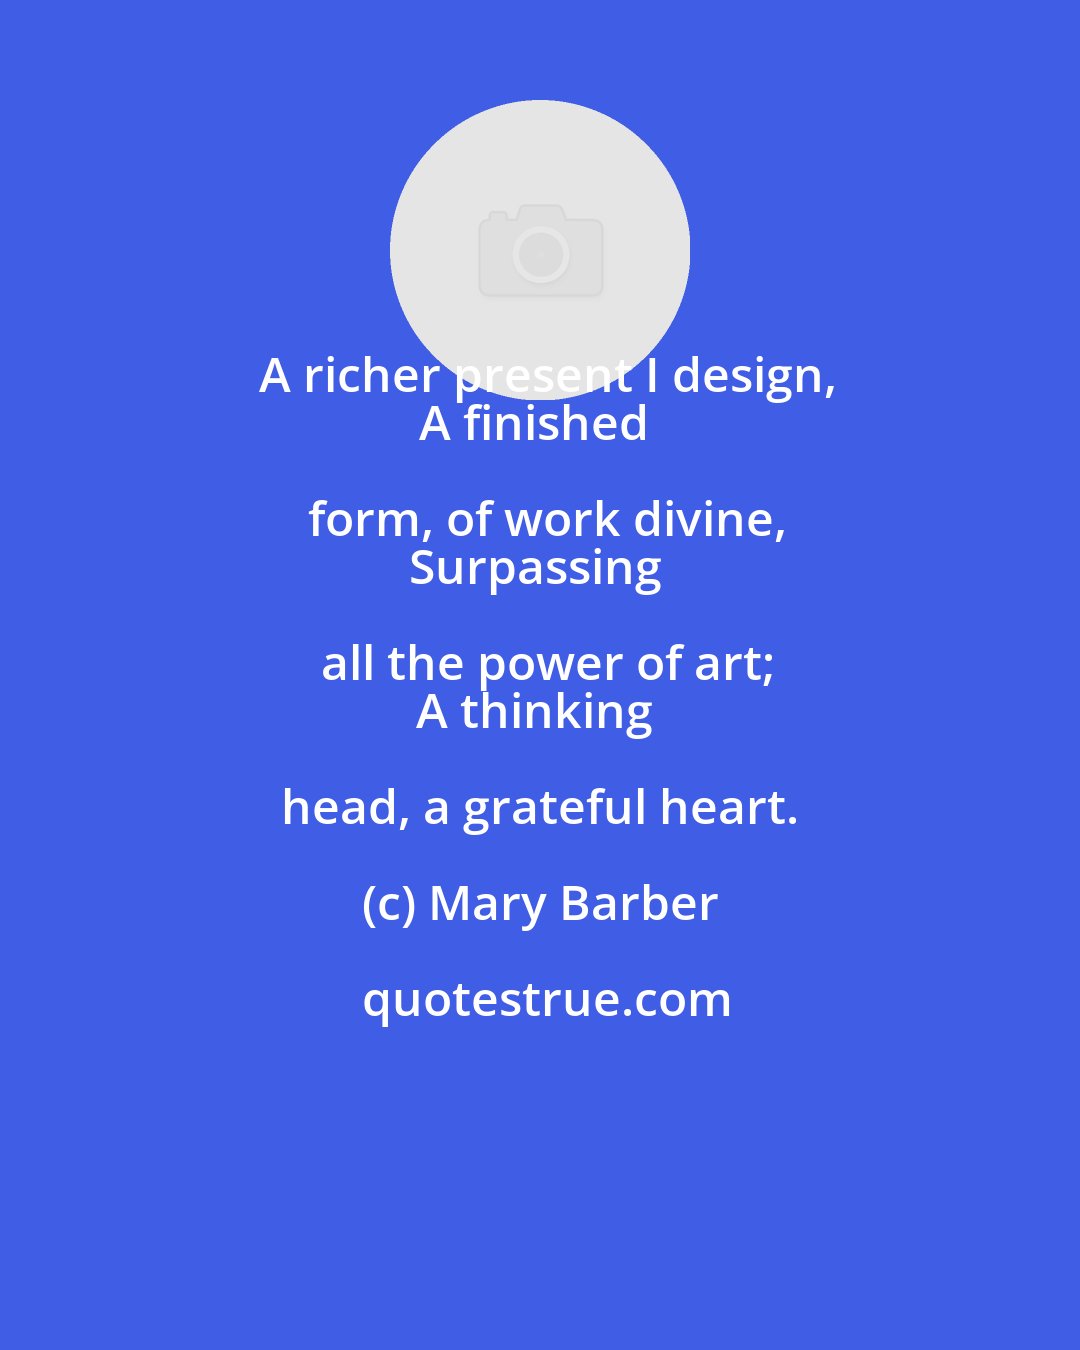 Mary Barber: A richer present I design,
A finished form, of work divine,
Surpassing all the power of art;
A thinking head, a grateful heart.